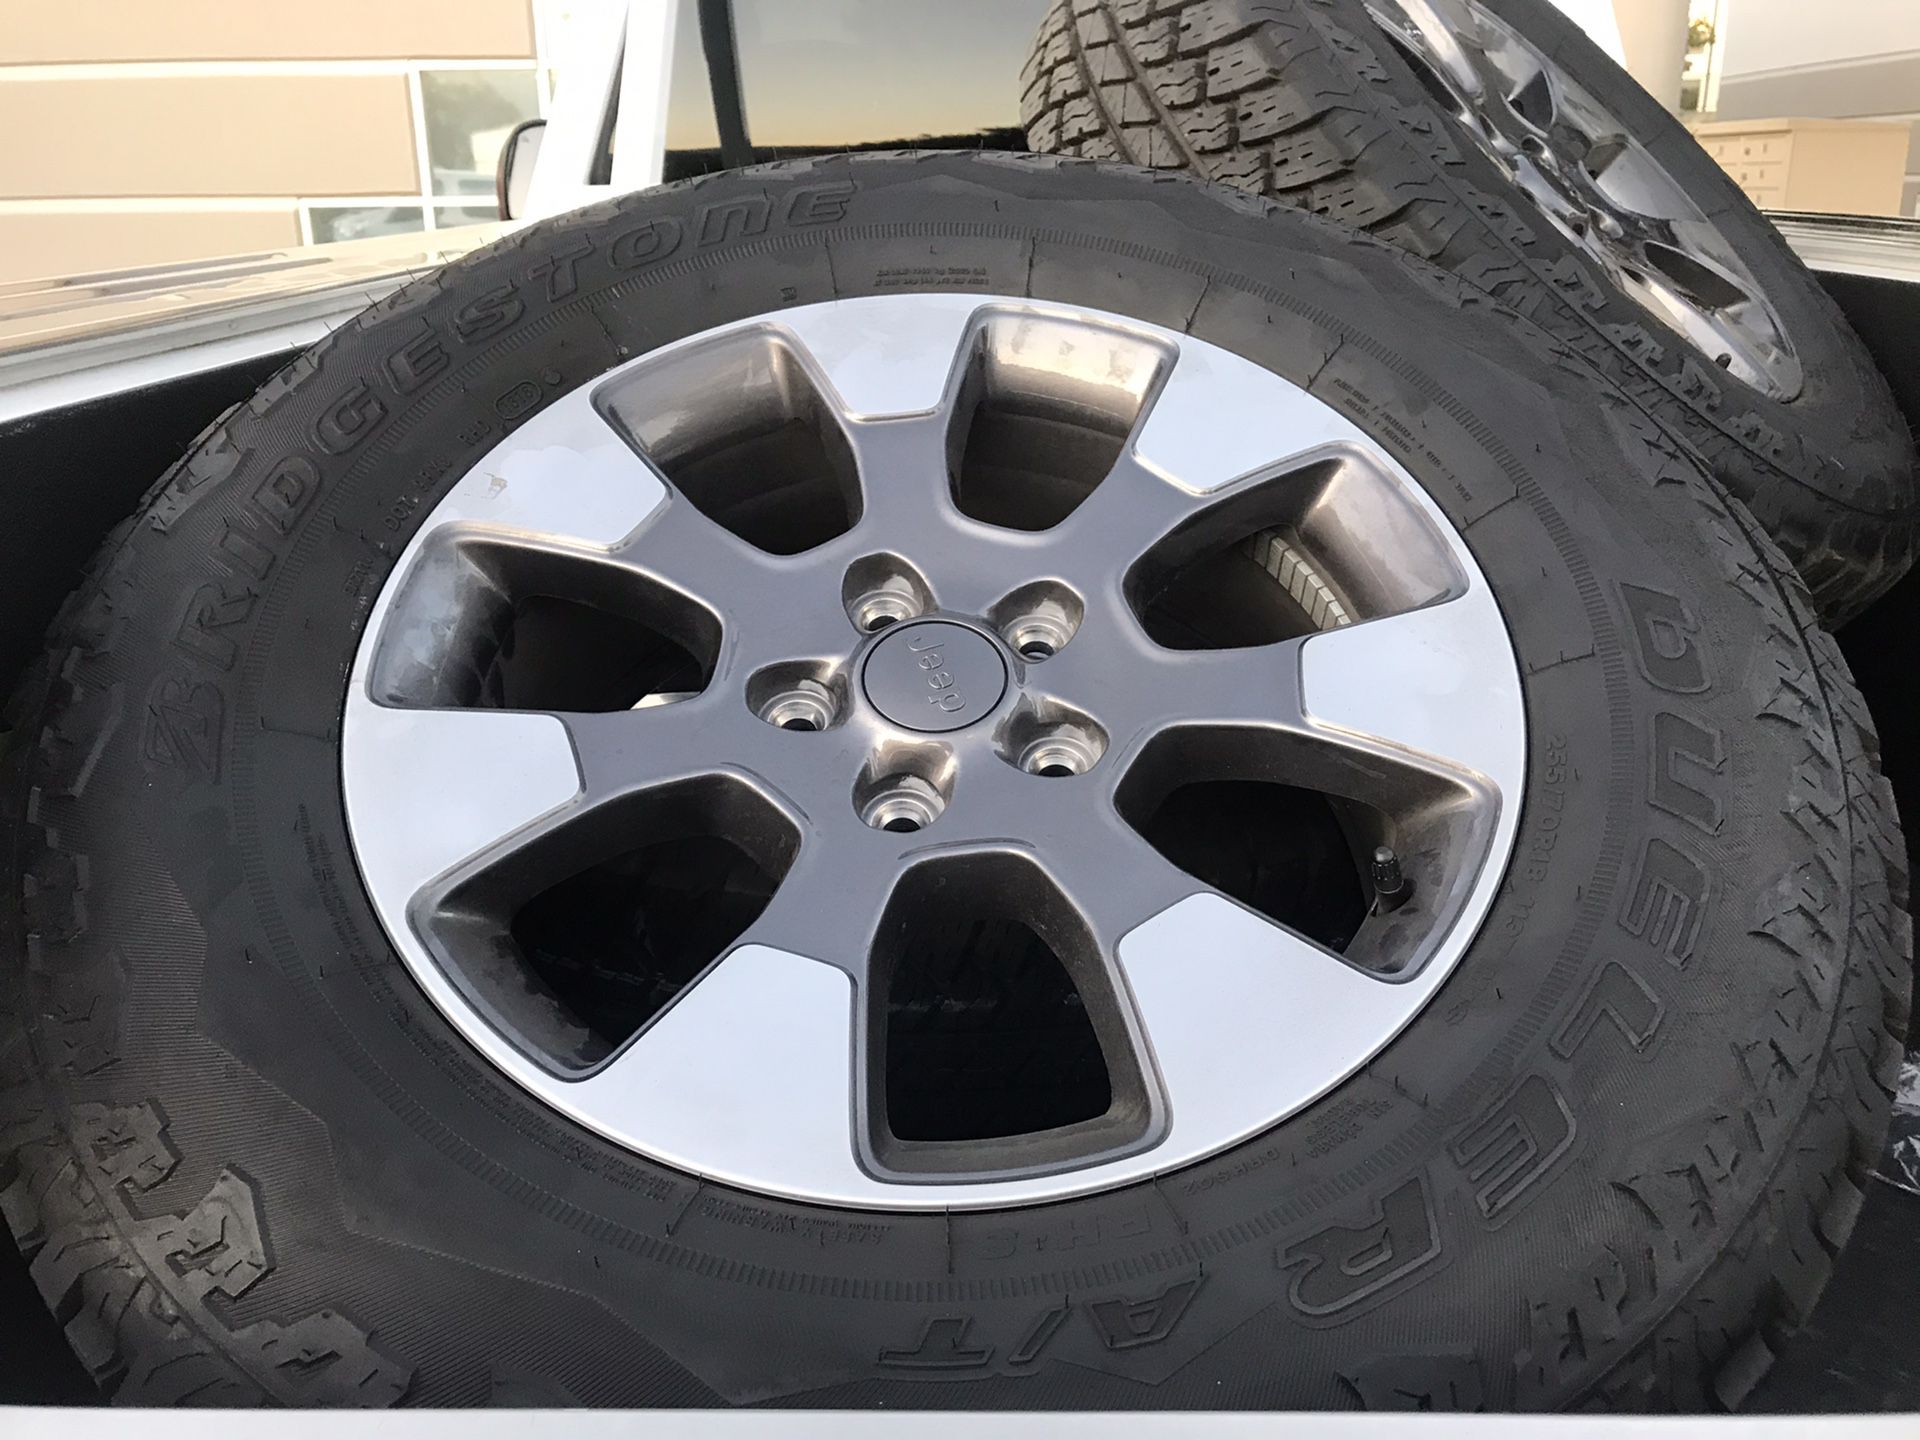 5 each Jeep rims and tires less than 1,000 miles